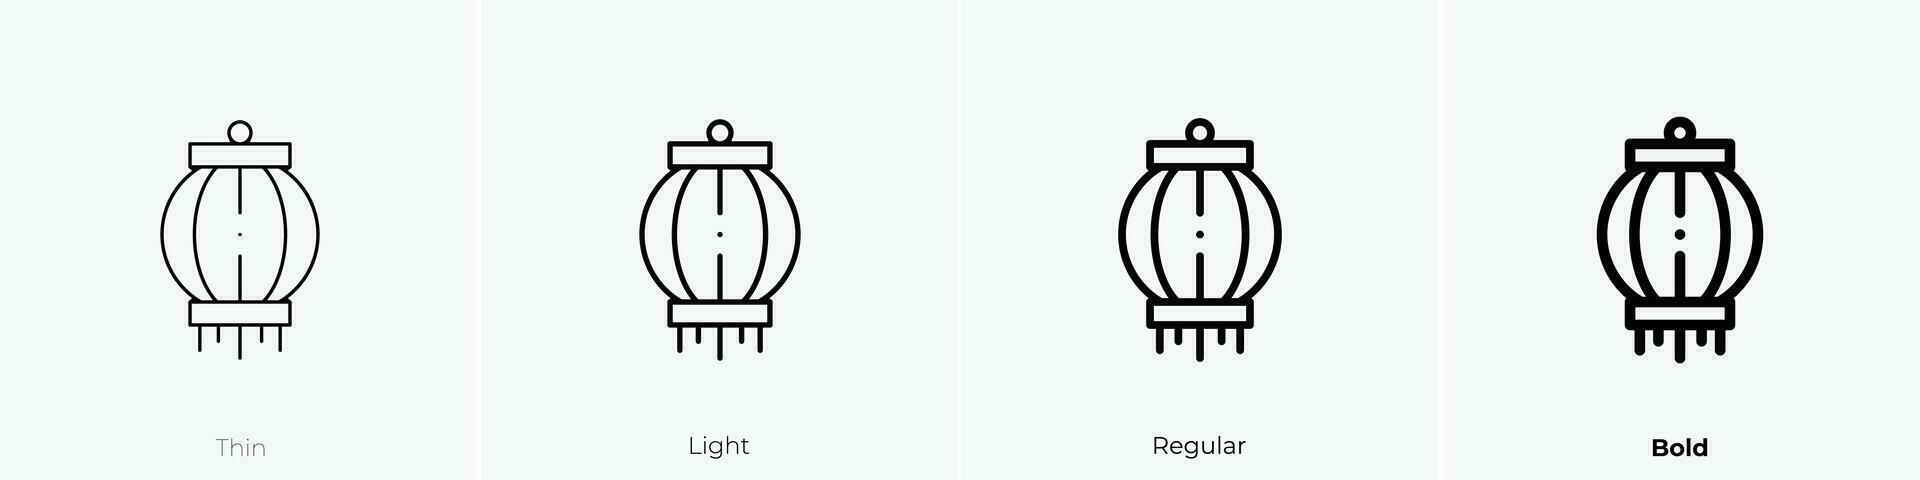 paper lamp icon. Thin, Light, Regular And Bold style design isolated on white background vector